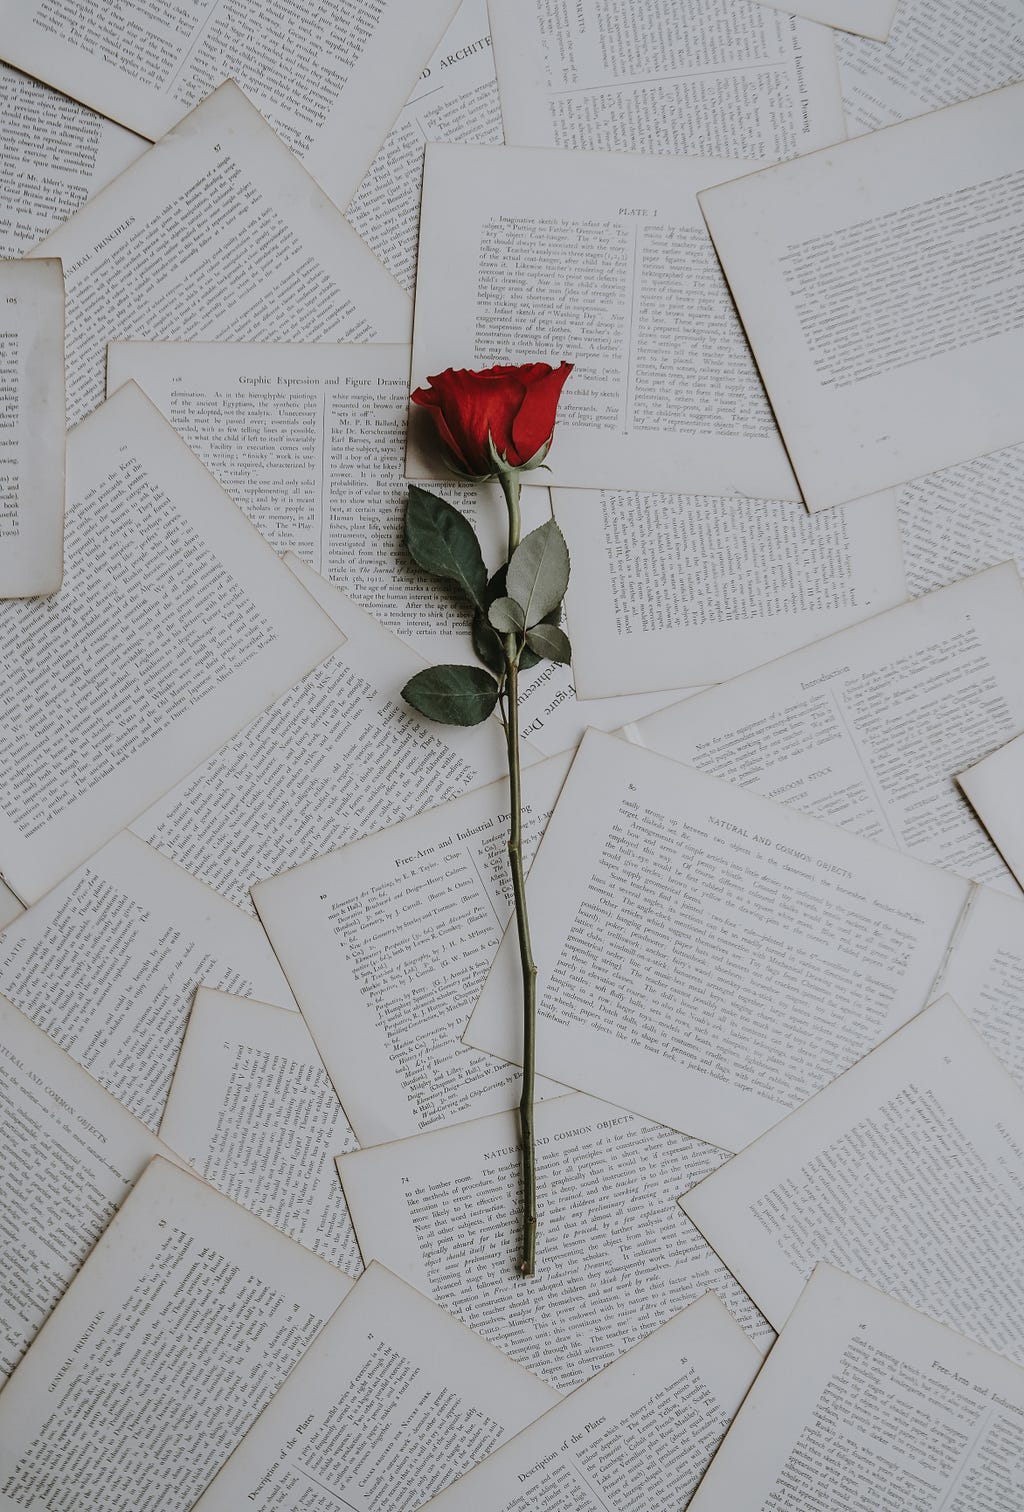 A single rose laying on a pile of book papers, which captured the beauty and sorrow of love.